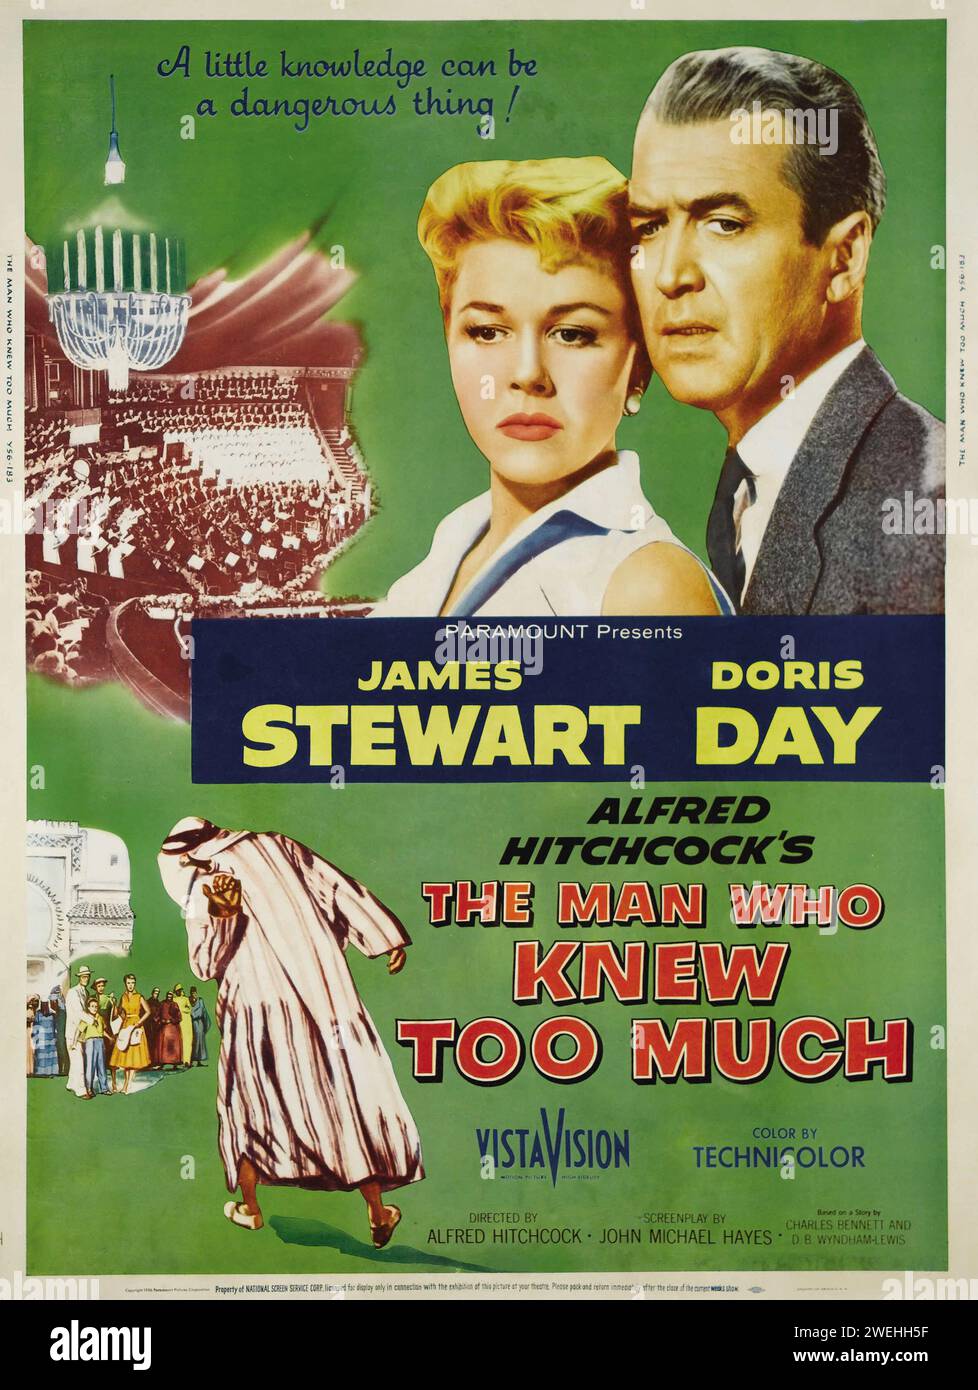 Vintage film poster - The Man Who Knew Too Much (Paramount, 1956) James Stewart and Doris Day - Directed by Alfred Hitchcock Stock Photo